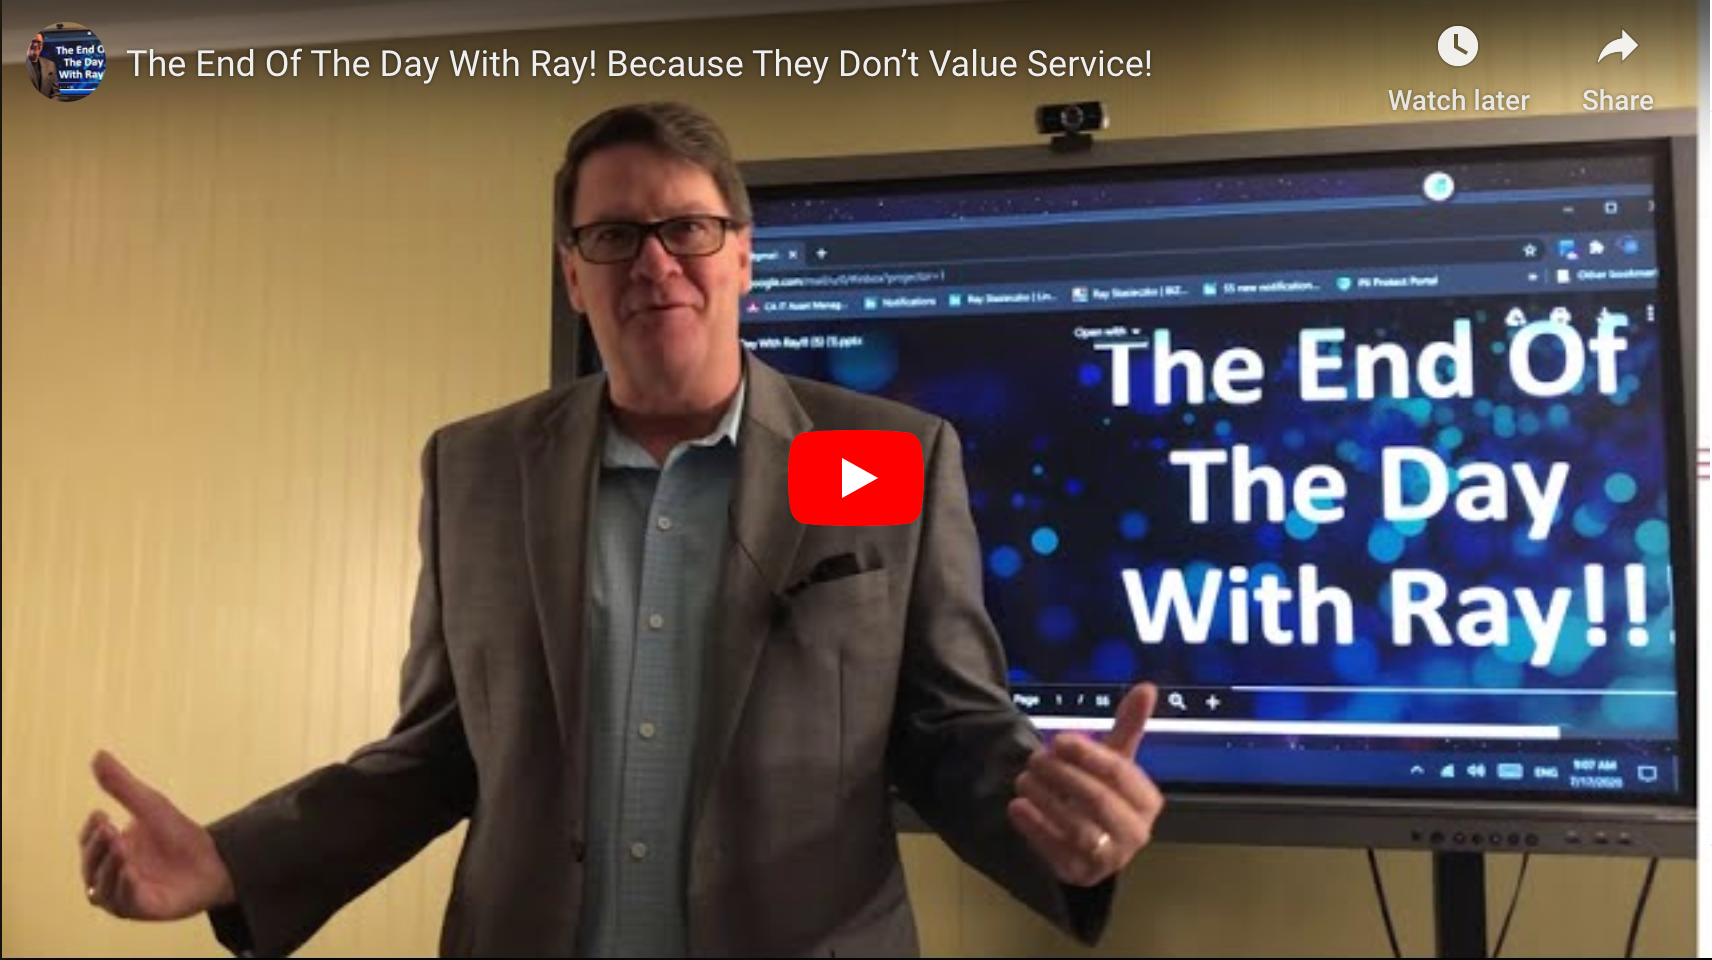 The End Of The Day With Ray! Because They Don’t Value Service!